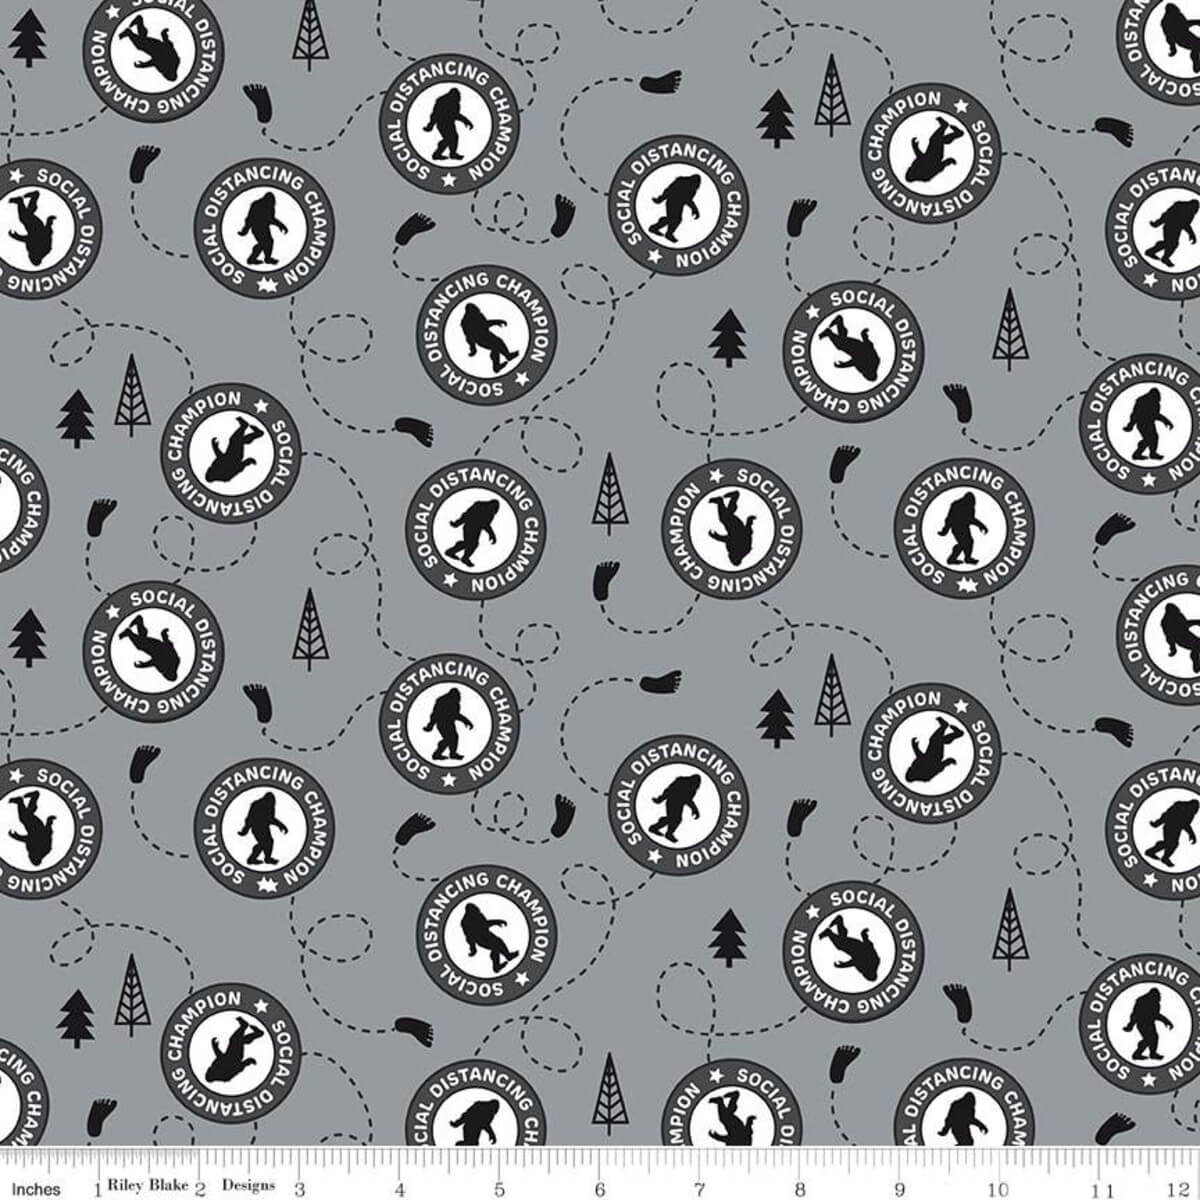 Face Mask Sasquatch Gray Fabric by the Yard available at Nancy Zieman Productions ShopNZP.com